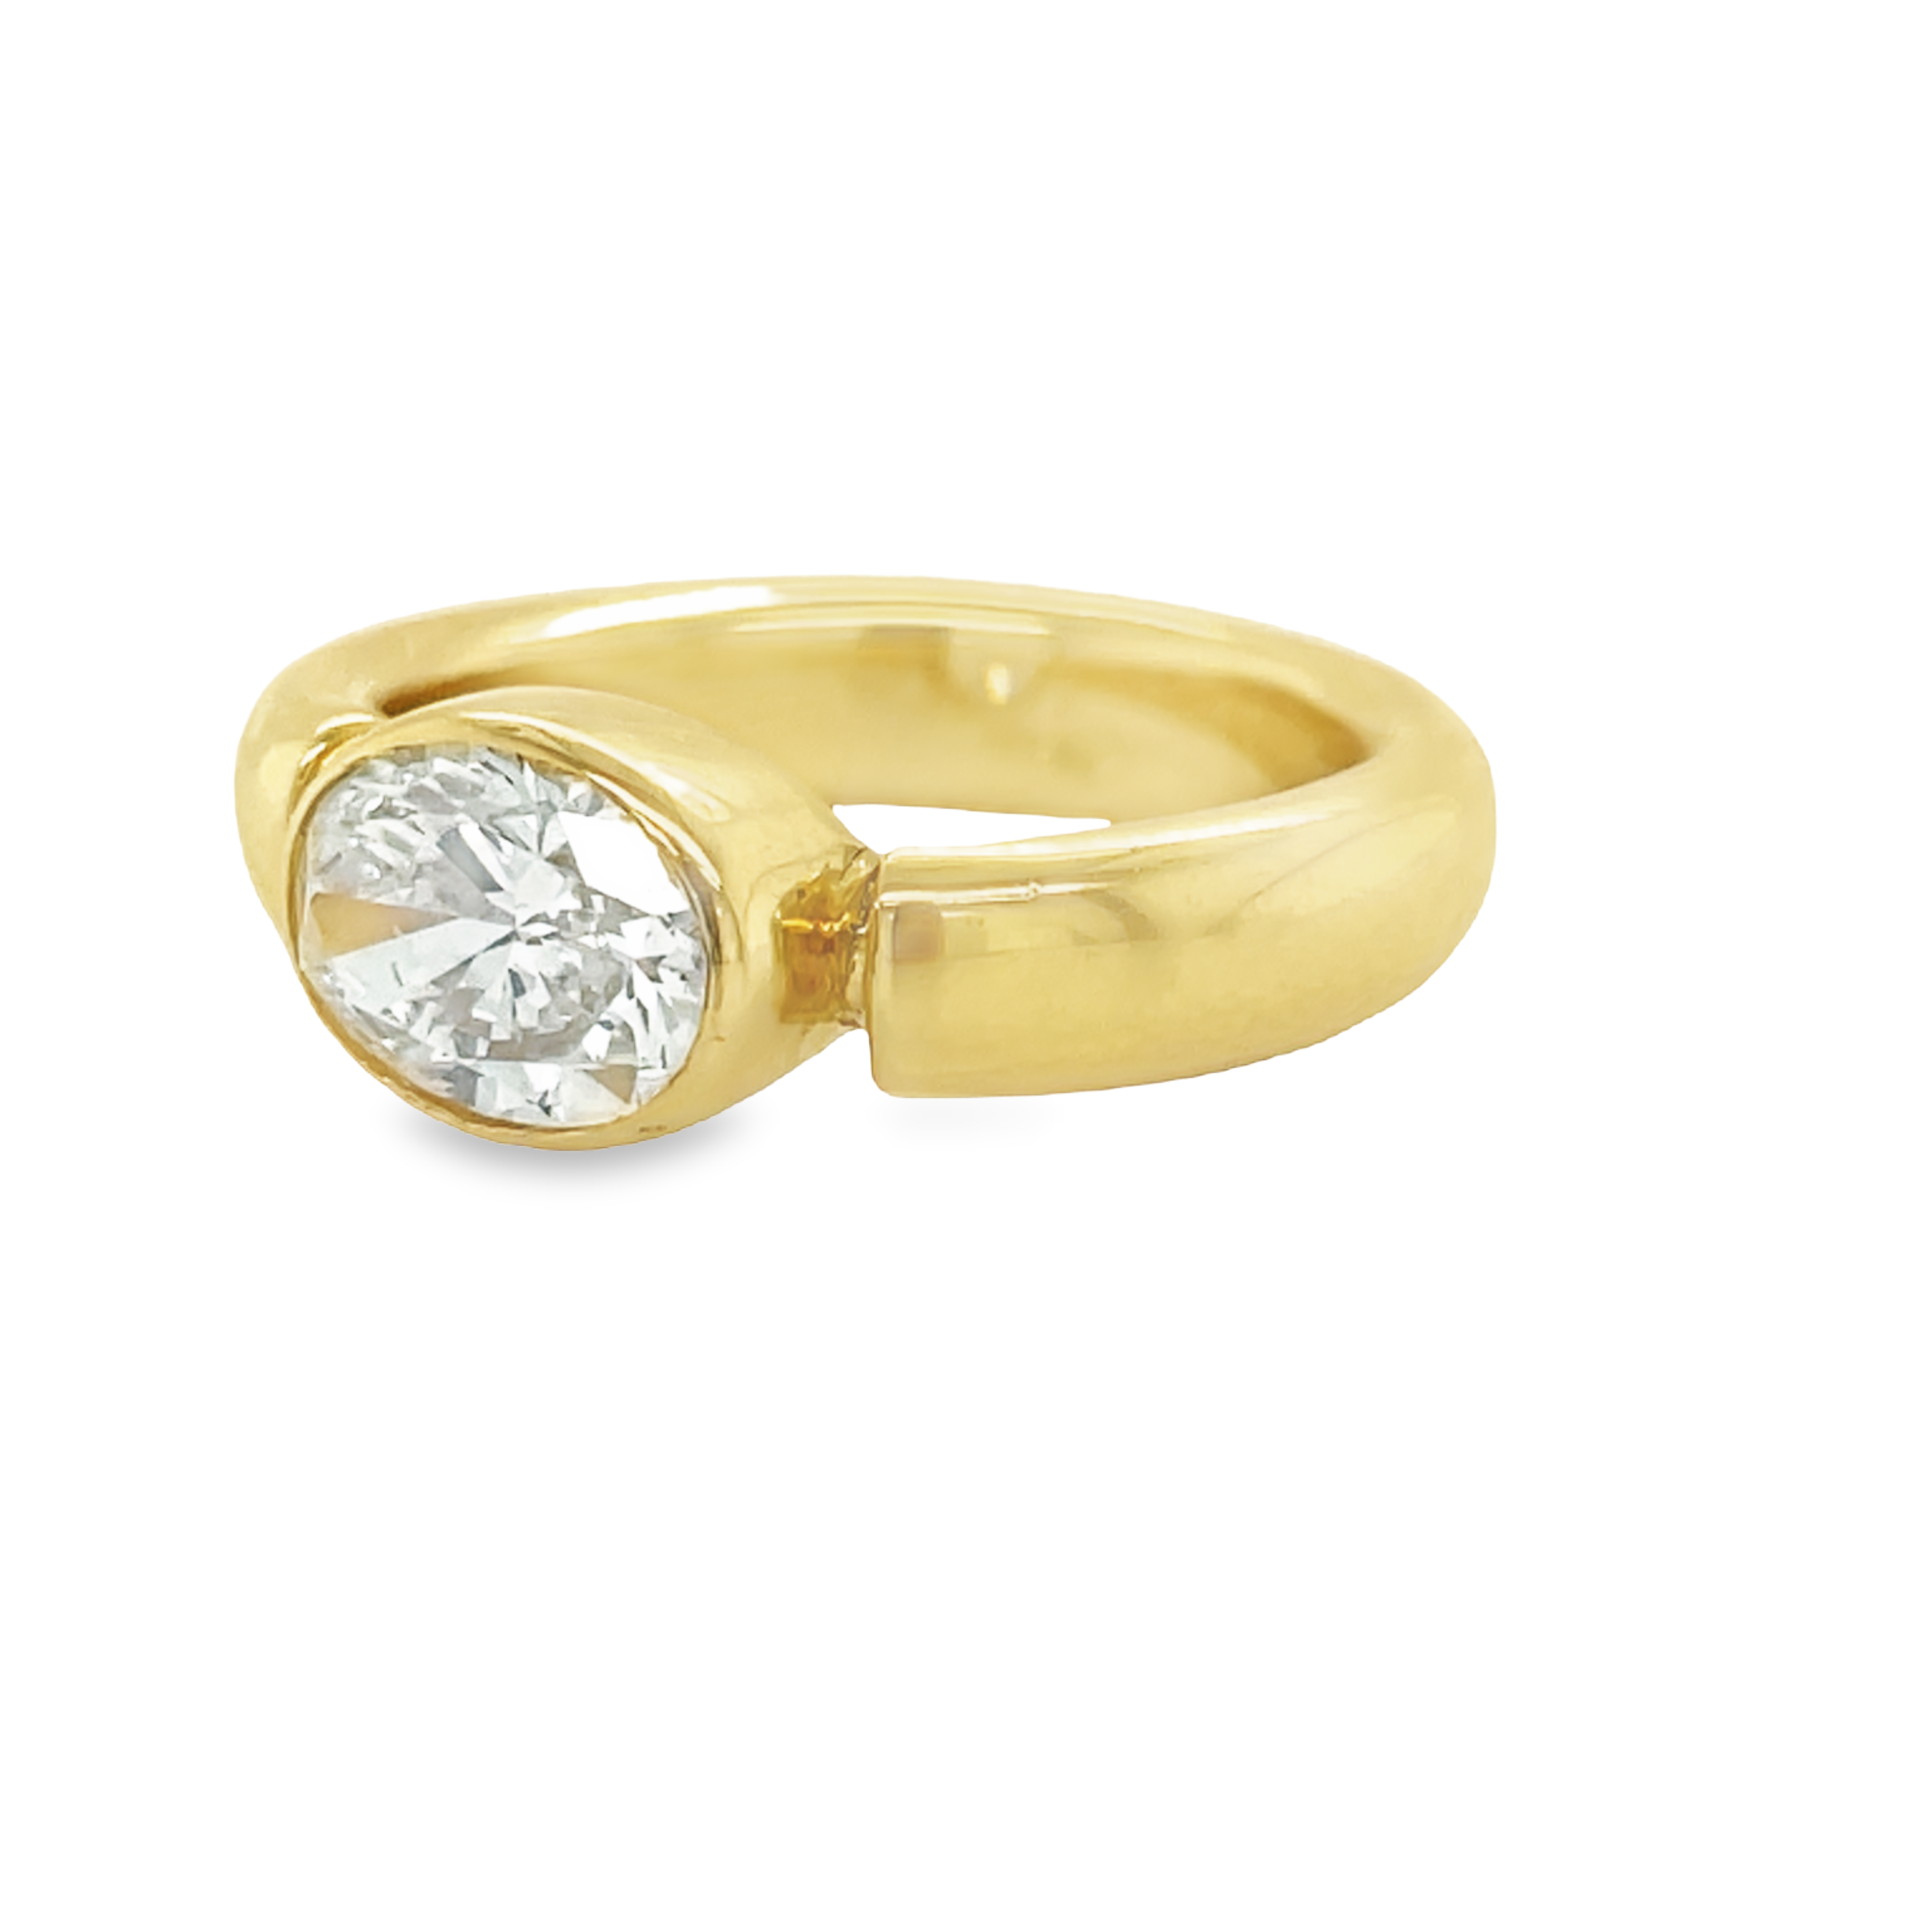 A modern take on the classic engagement ring, this custom design showcases a GIA certified 1.051 ct Oval Cut diamond set east-west in a contemporary 18k gold bezel setting. With a SI1 Clarity and Color H rating, you can be sure this diamond is top quality. Plus, the comfortable fit band ensures all-day comfort.